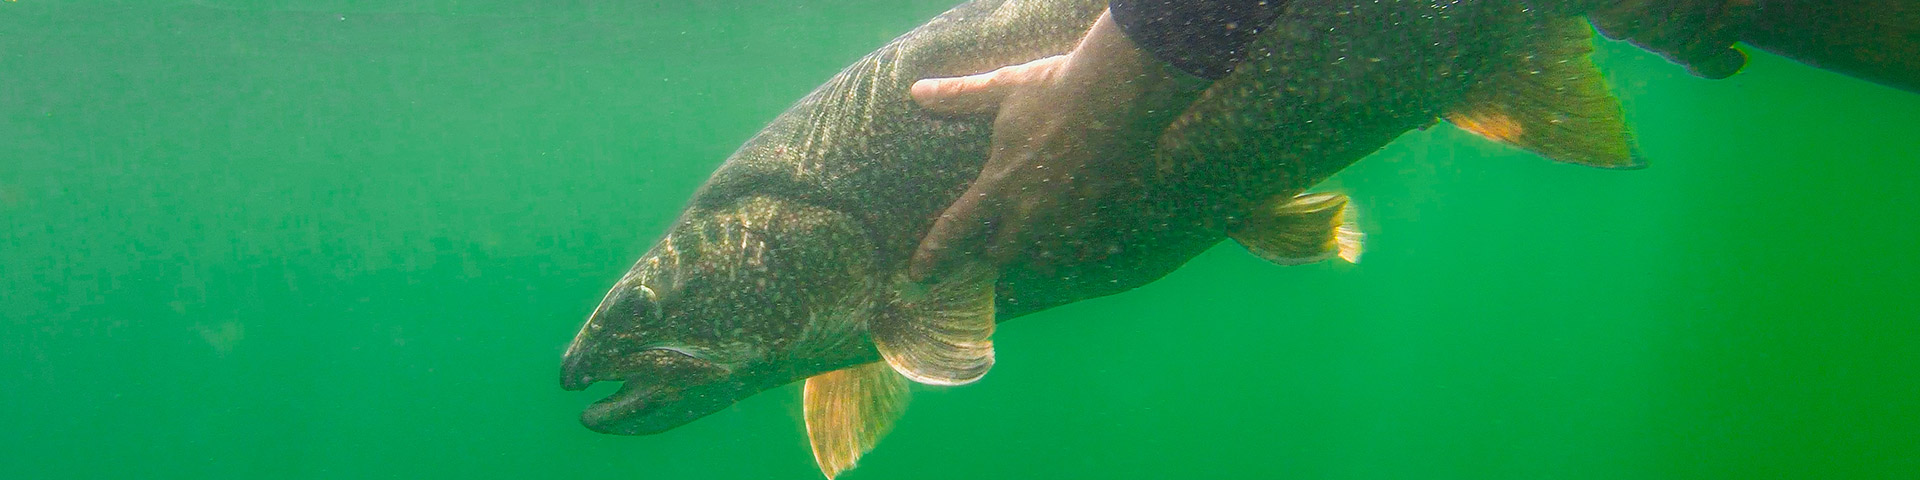 An angler demonstrates good fish handling technique before they release it. The lake trout is submerged and they holding it by its tail while they gently cradle the body. 